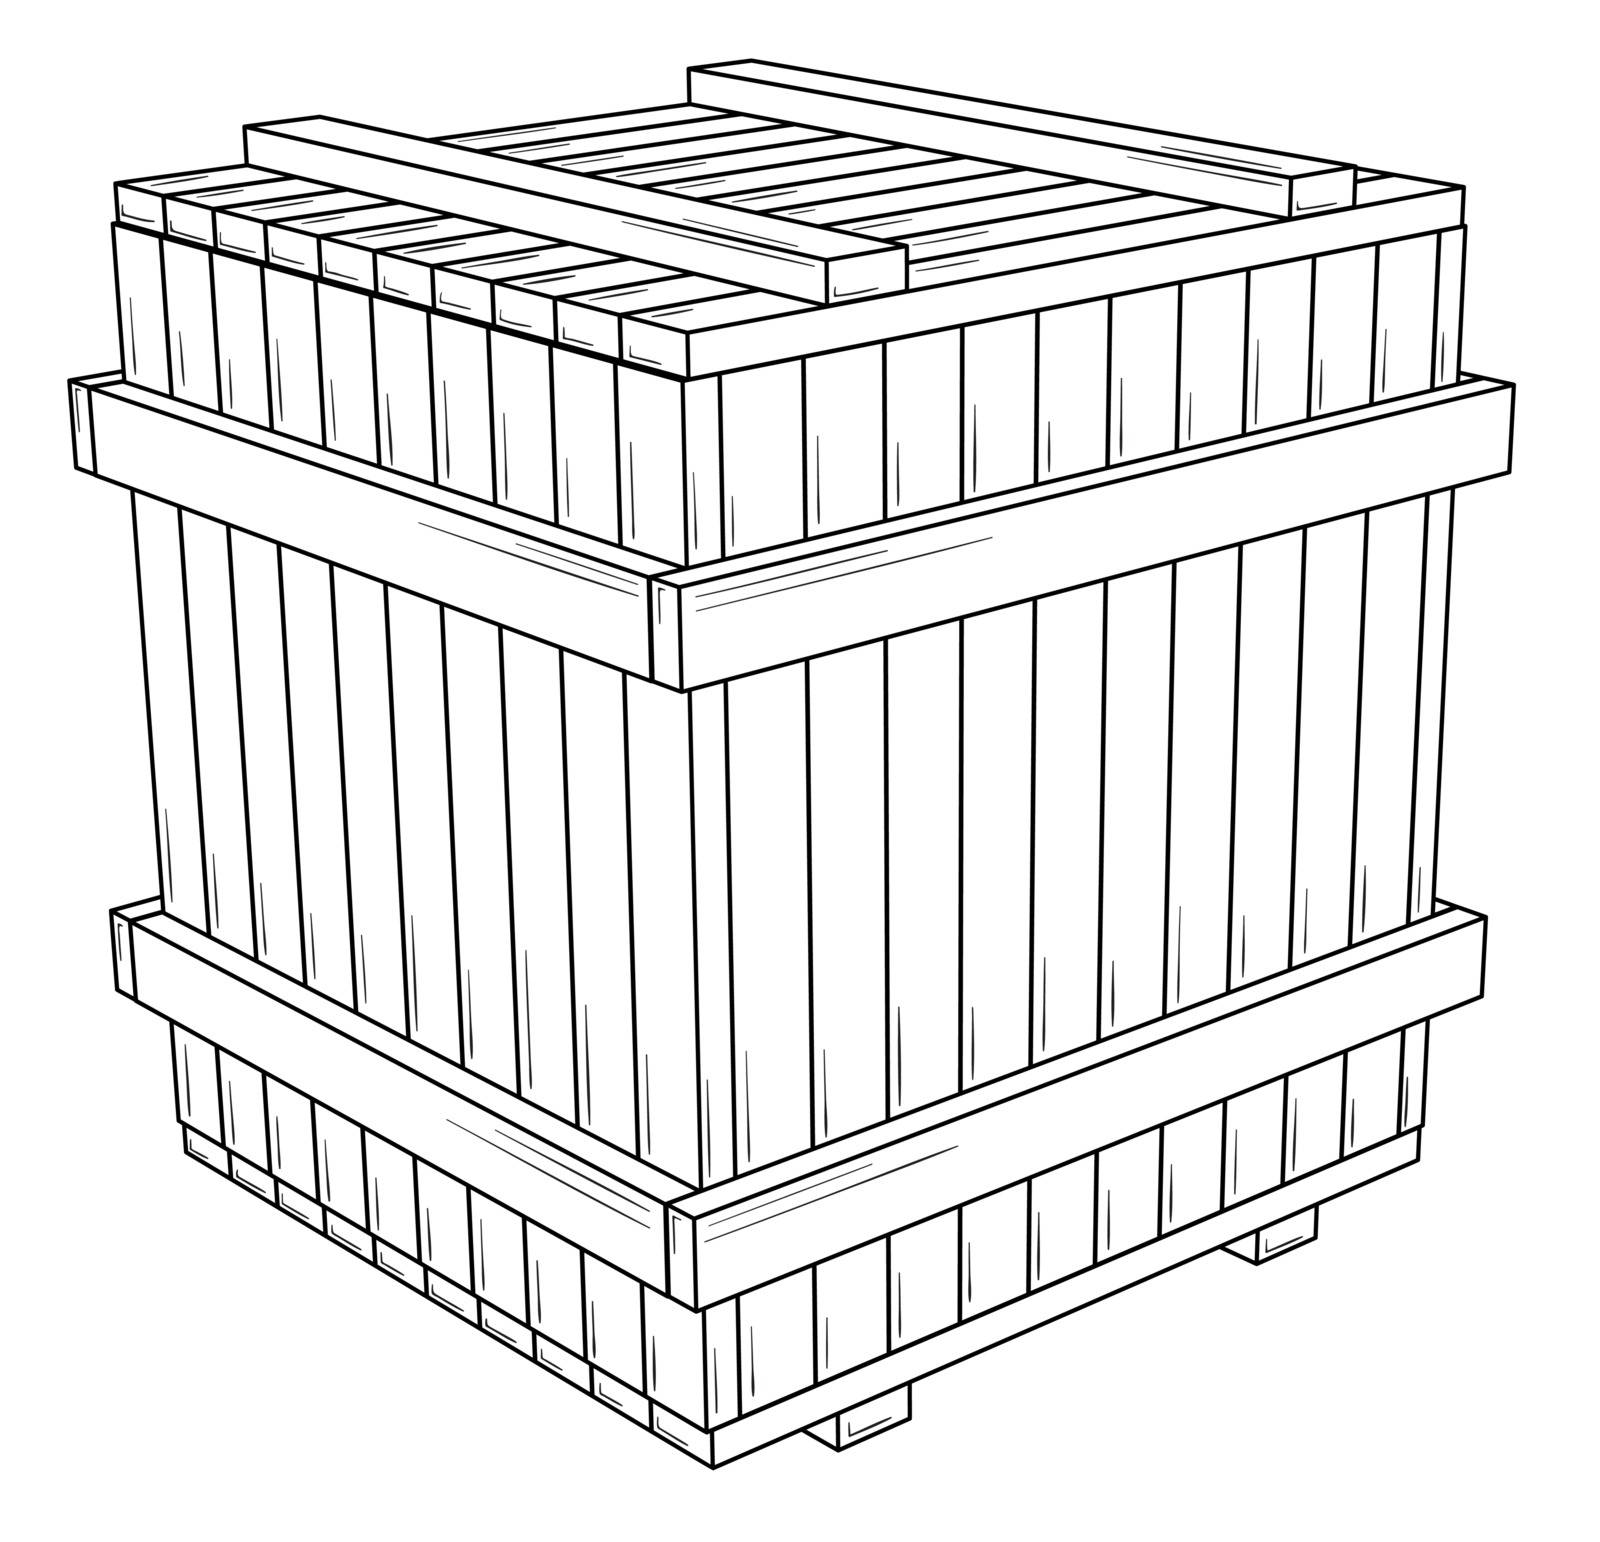 Closed wooden box as a protection of fragile goods during transport. Black outline illustration on white background. Sketch.